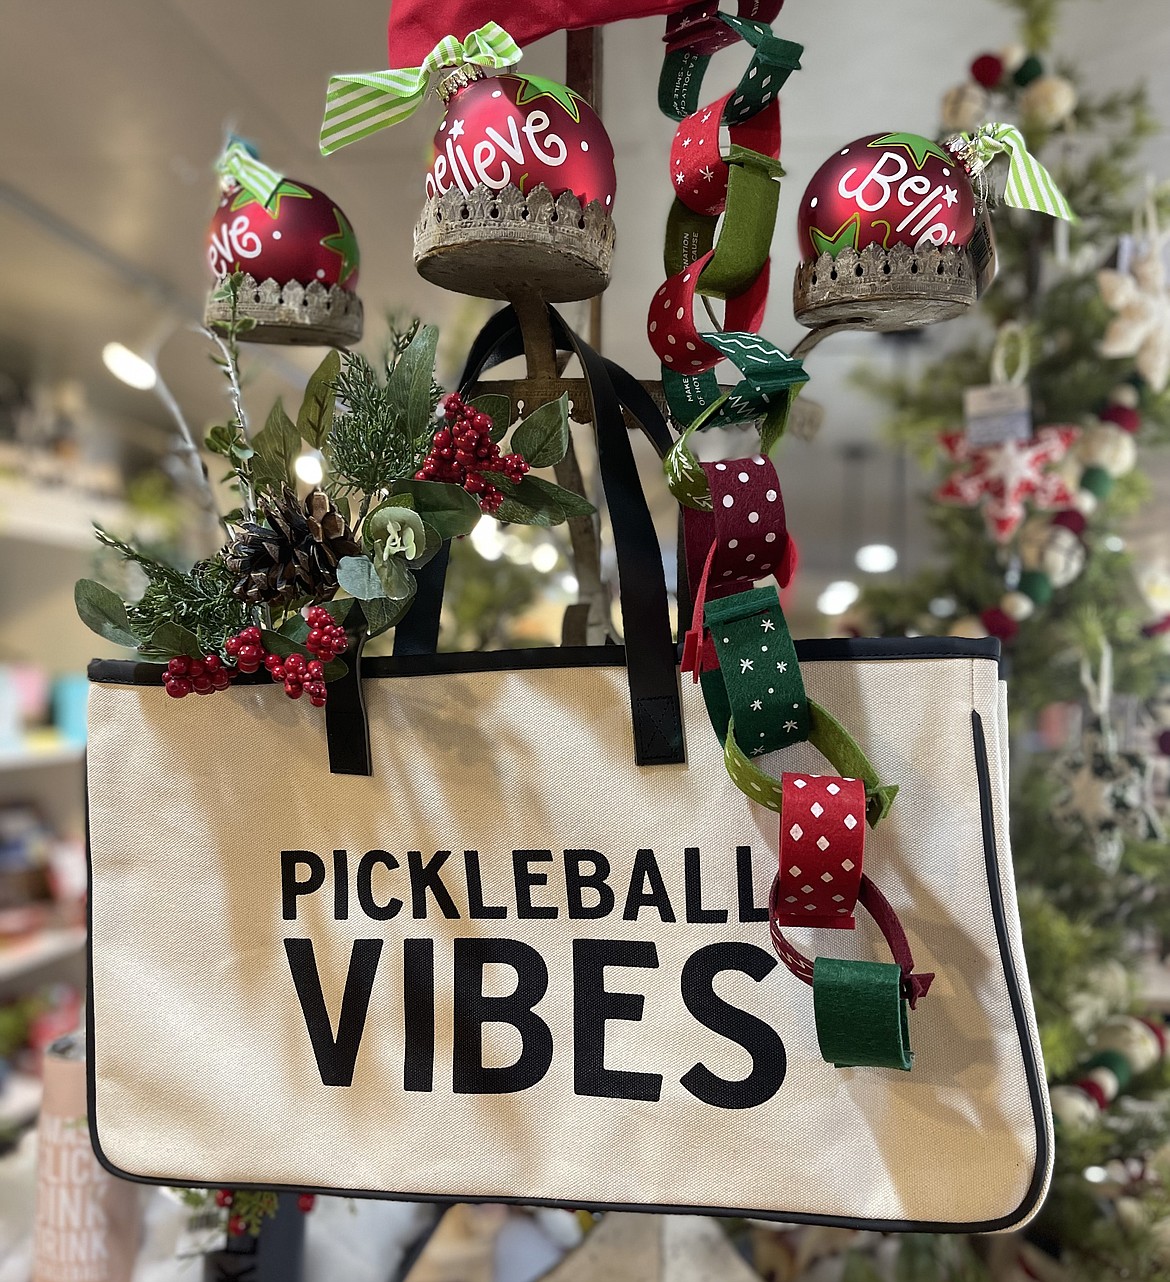 Pick Pickleball totes from Mix it Up as great gifts for a white elephant or office party. Mix it Up has gifts for everyone on your list ranging in price and style with a local flare.